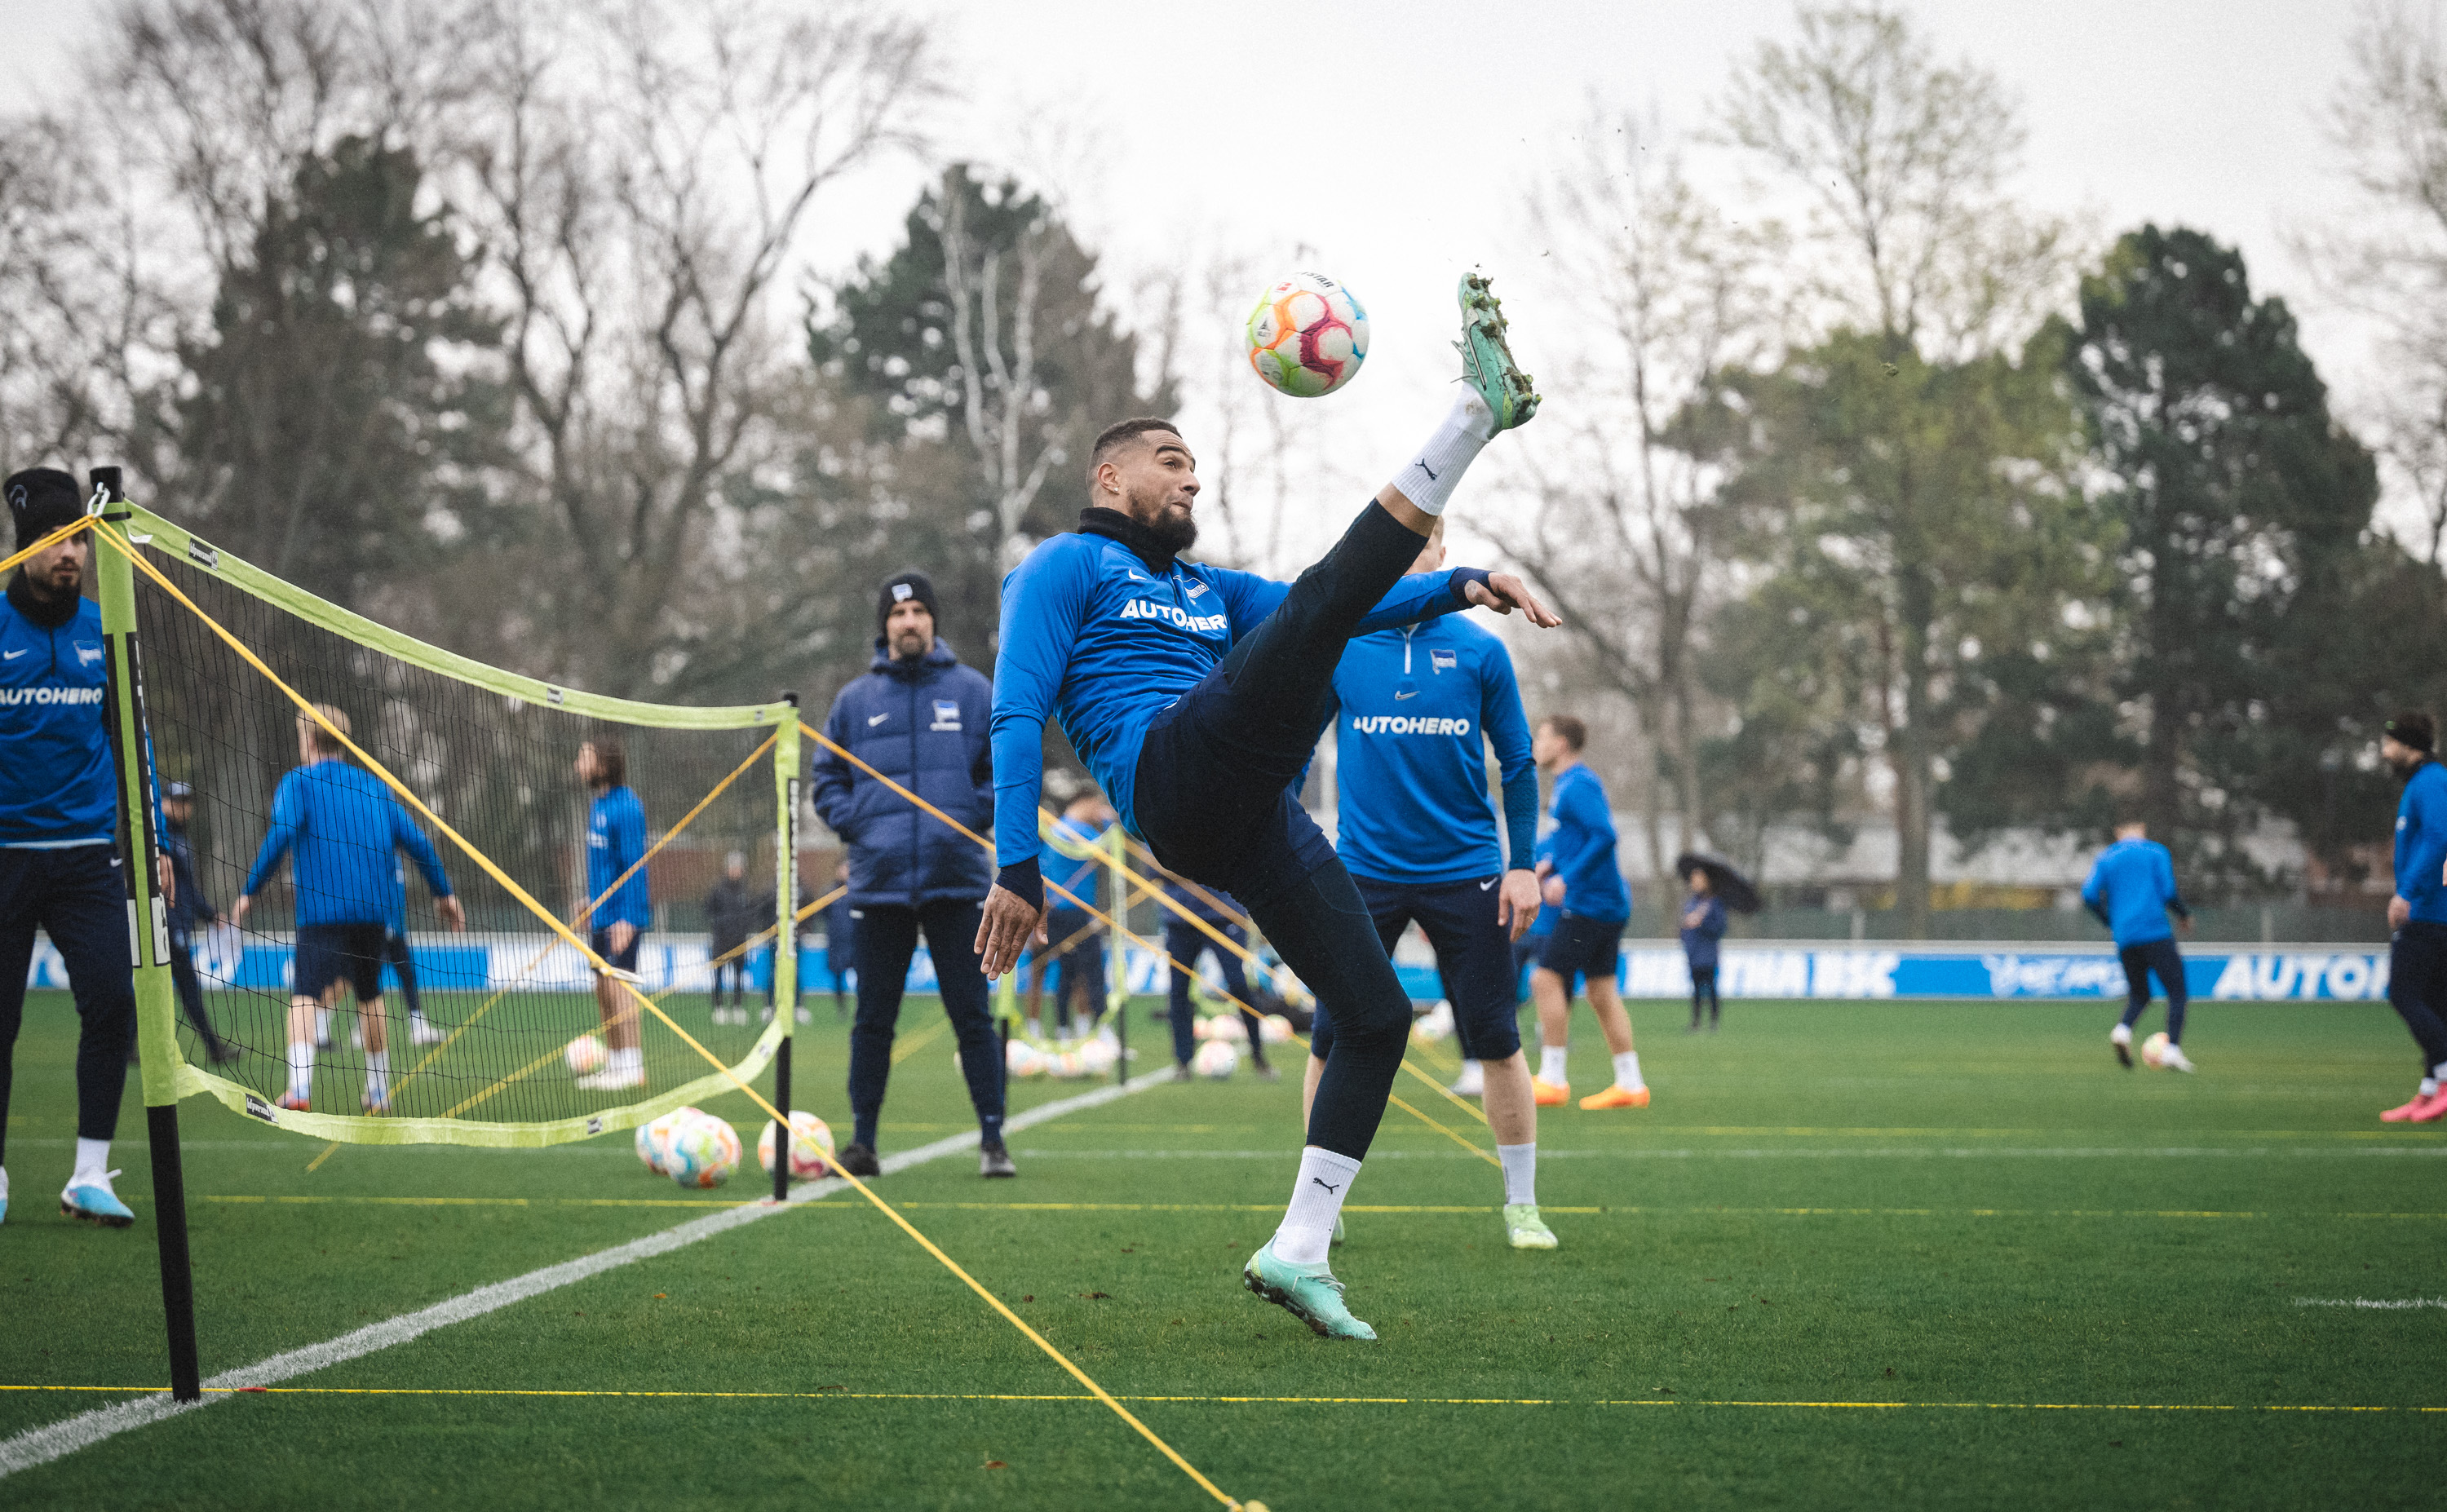 Prince Boateng in action in football tennis.